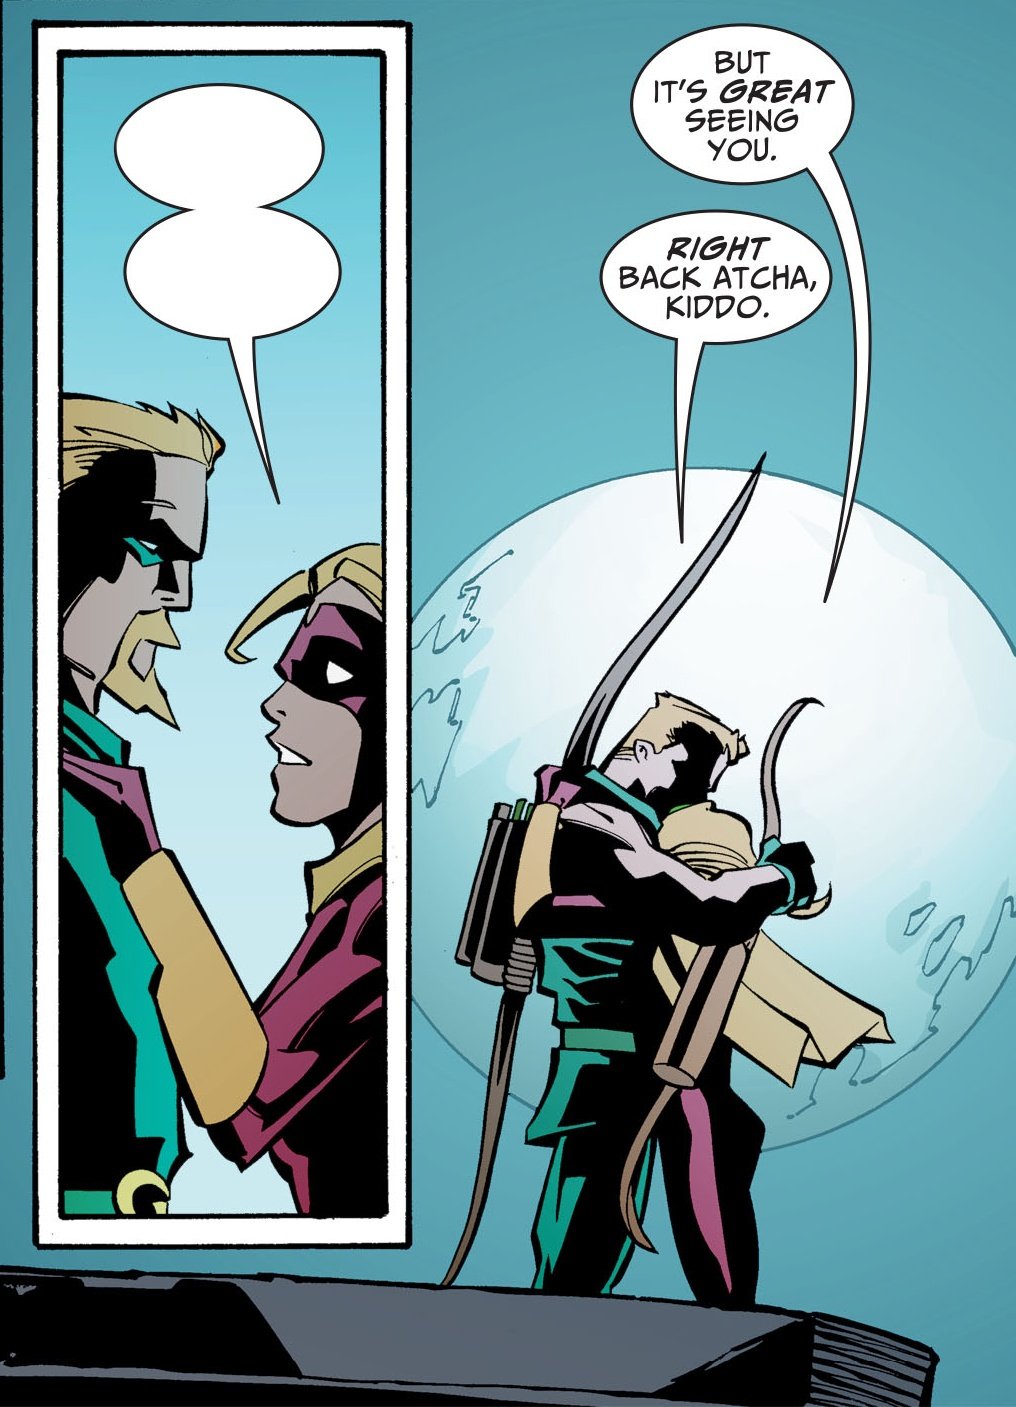 Green Arrow (Oliver Queen) and Speedy (Mia)